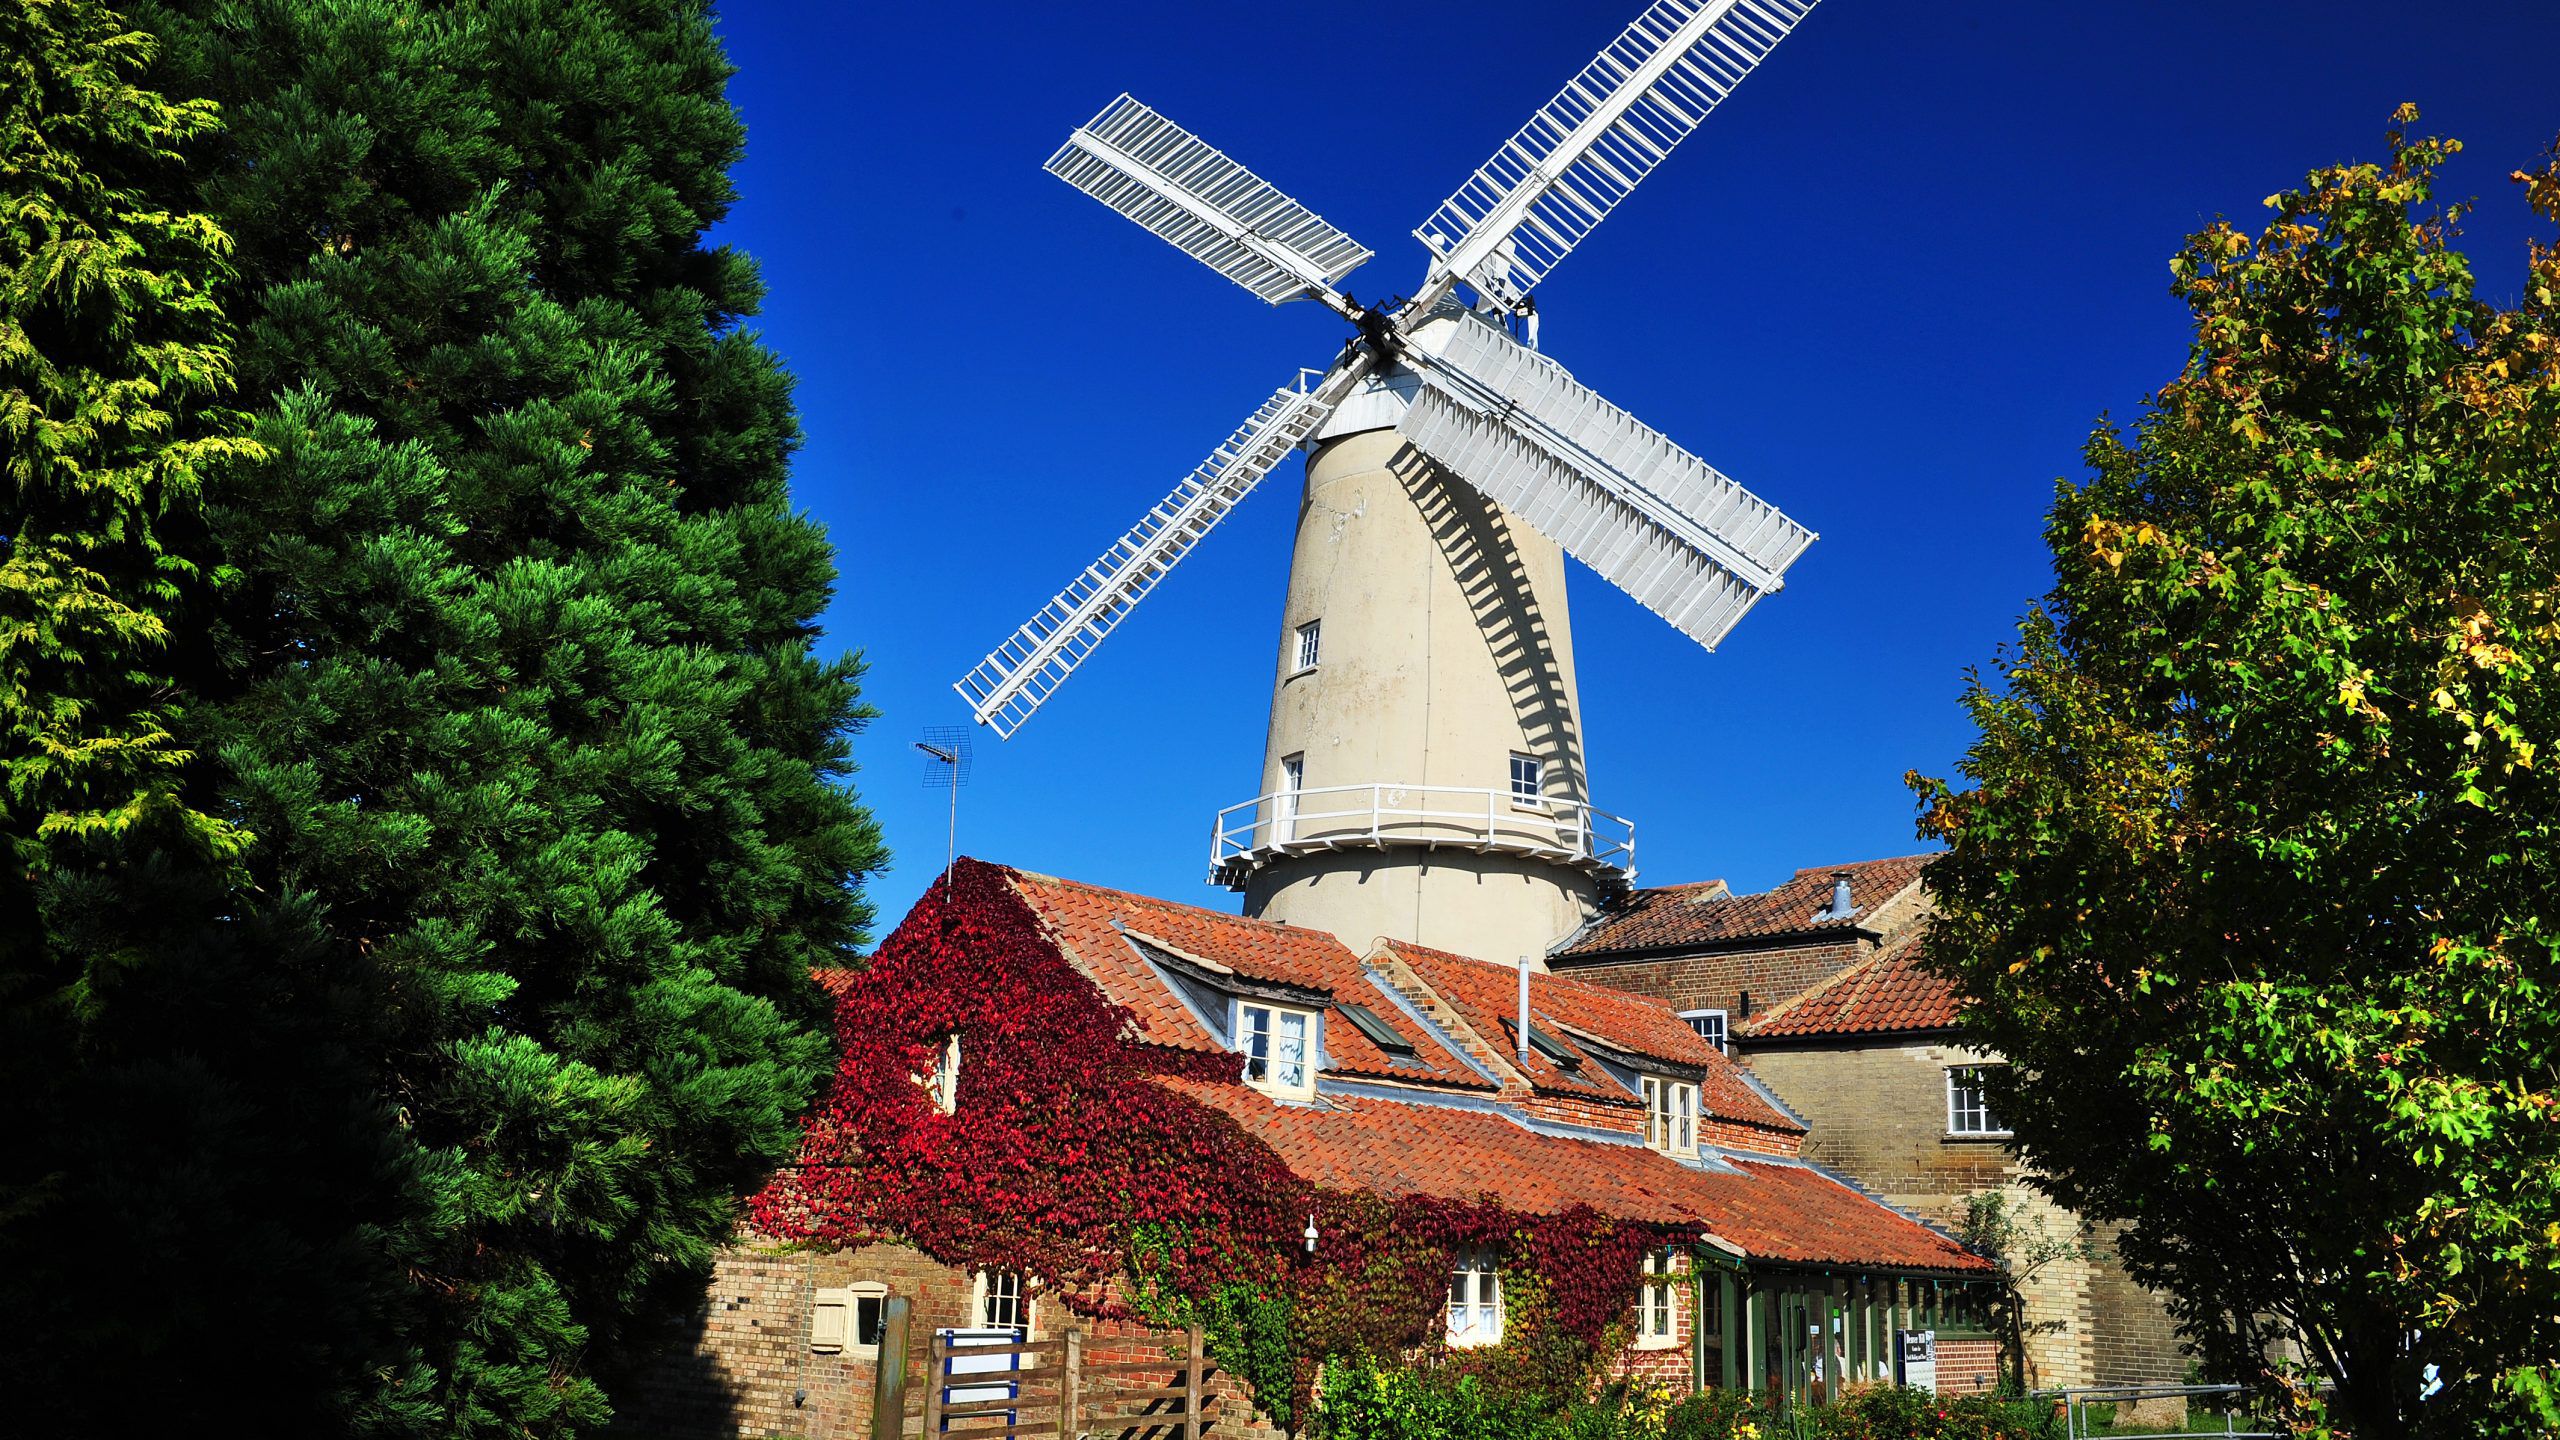 A beige windmill standing tall against a blue sky in west Norfolk.